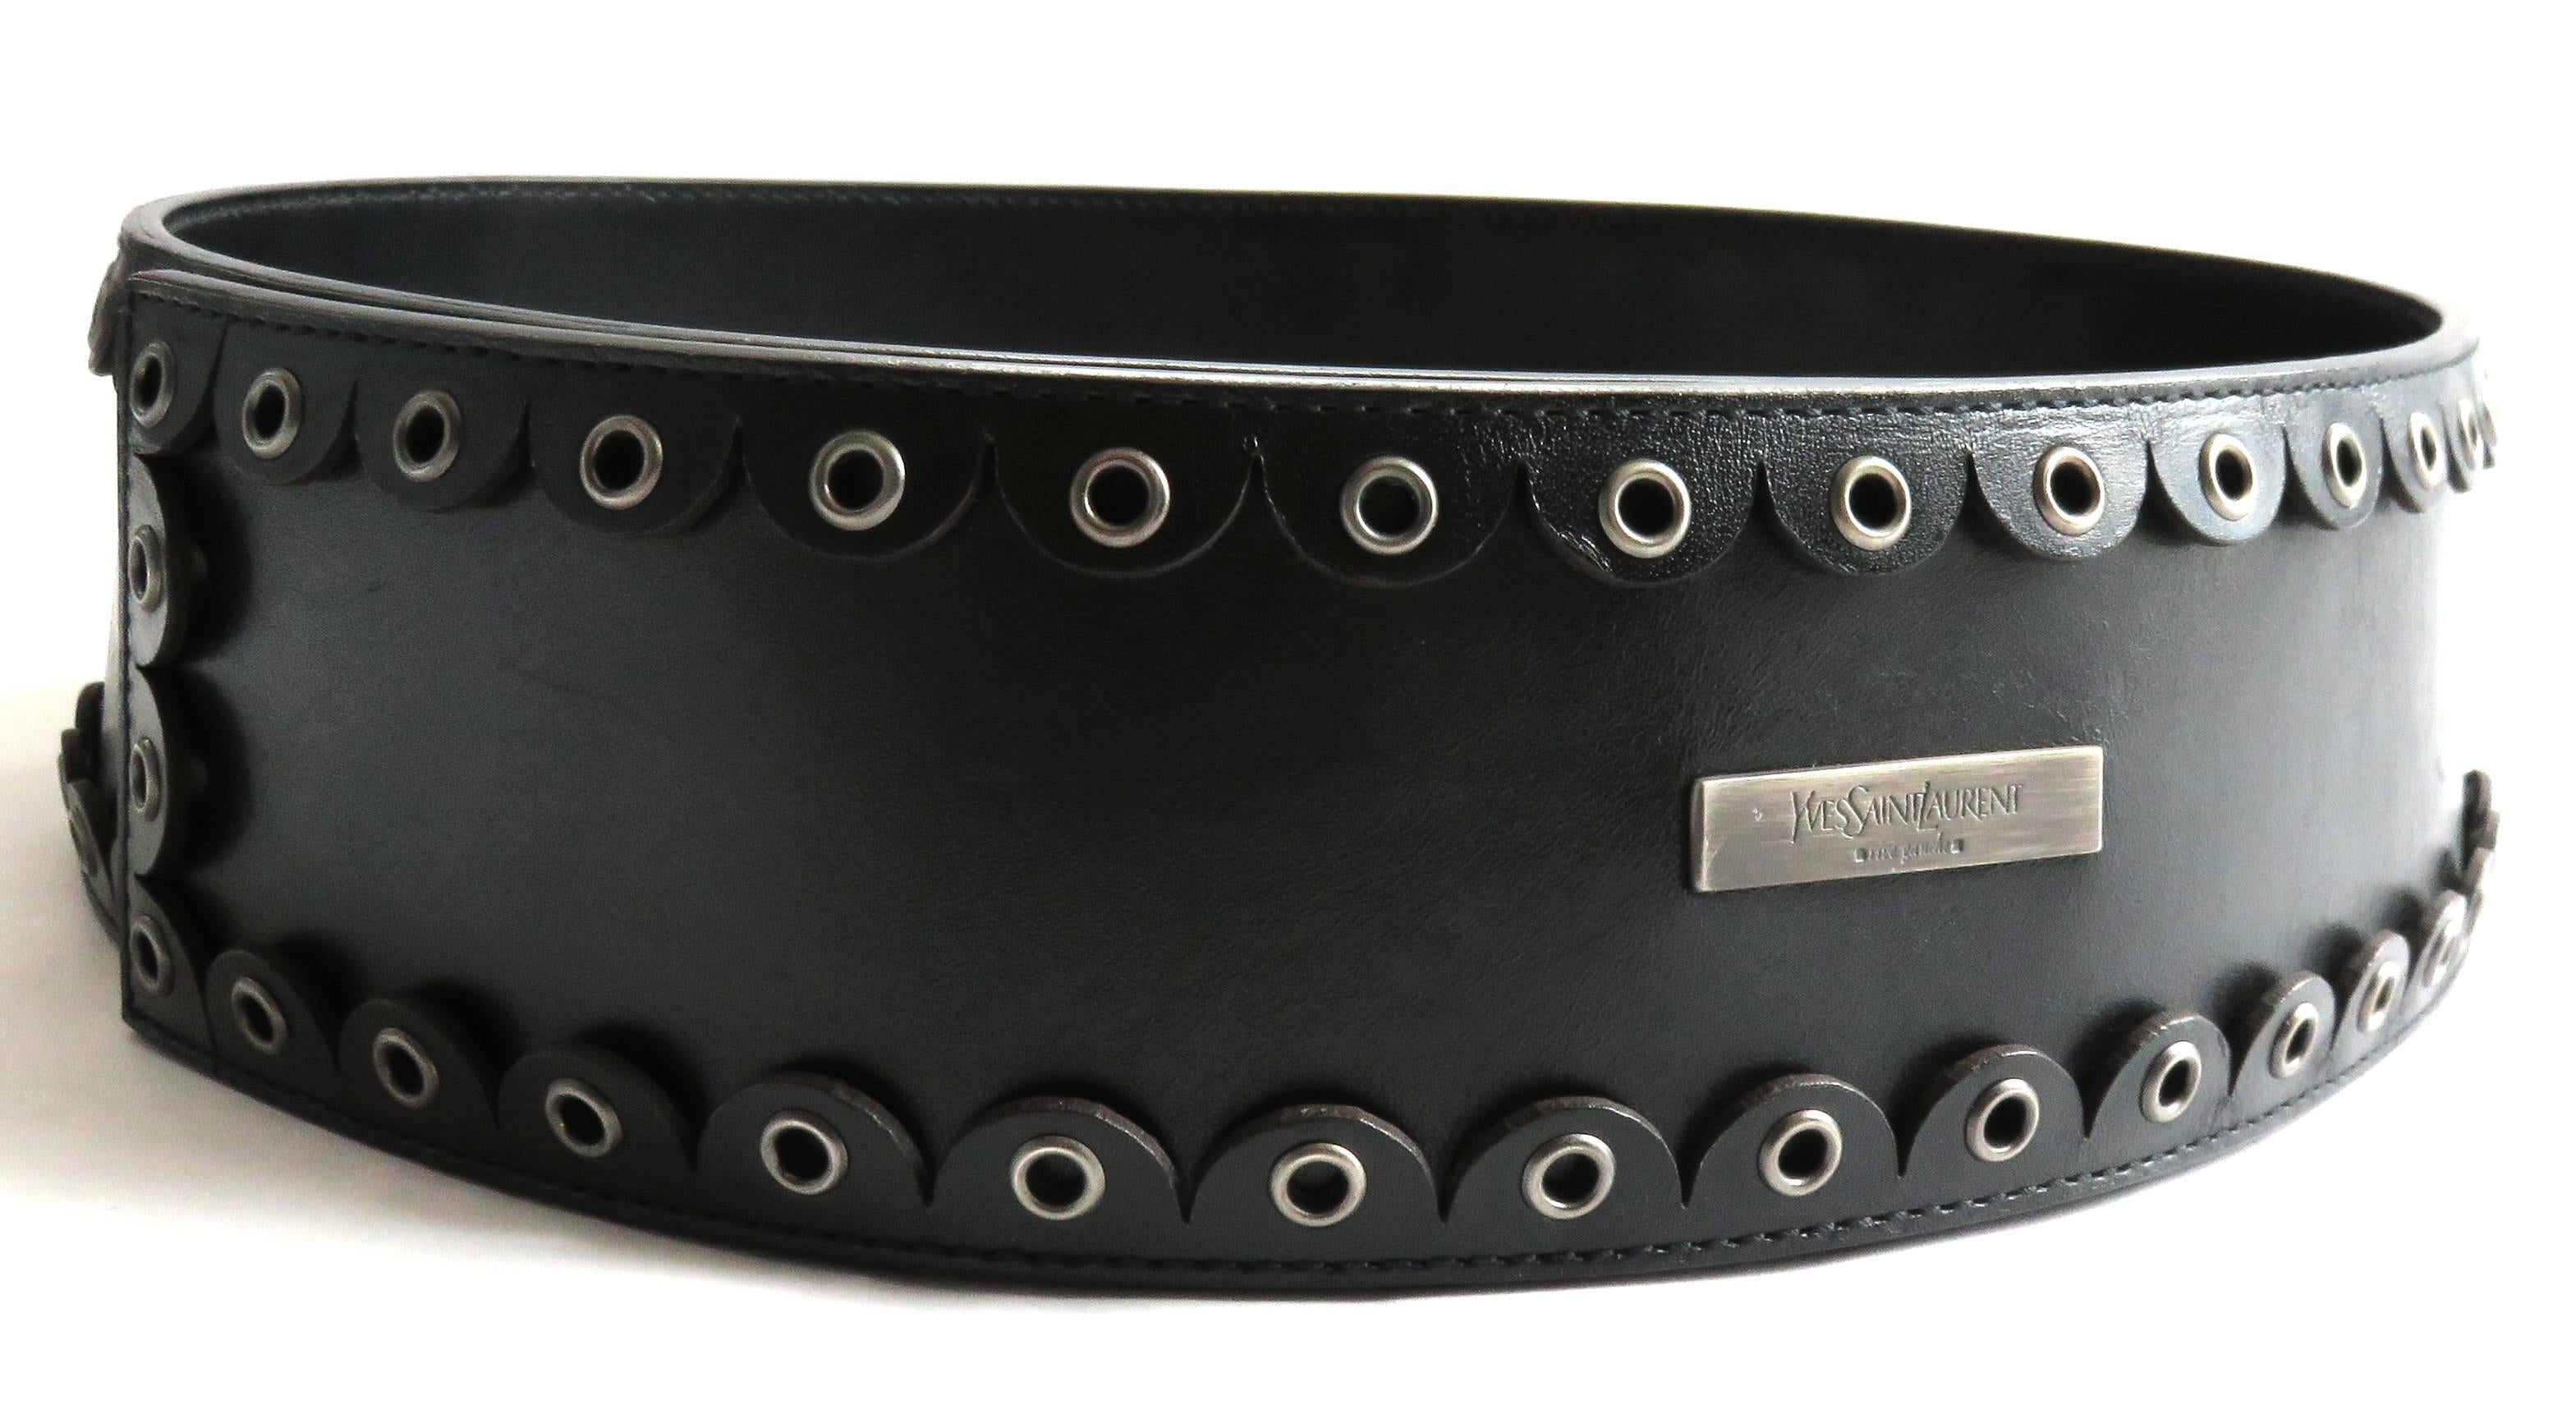 Excellent condition, 2001, YVES SAINT LAURENT by Tom Ford, wide leather runway belt.

Iconic runway belt in dark brown leather with scalloped edging, and metal grommets at top and bottom edges.

Logo engraved, metal plate at